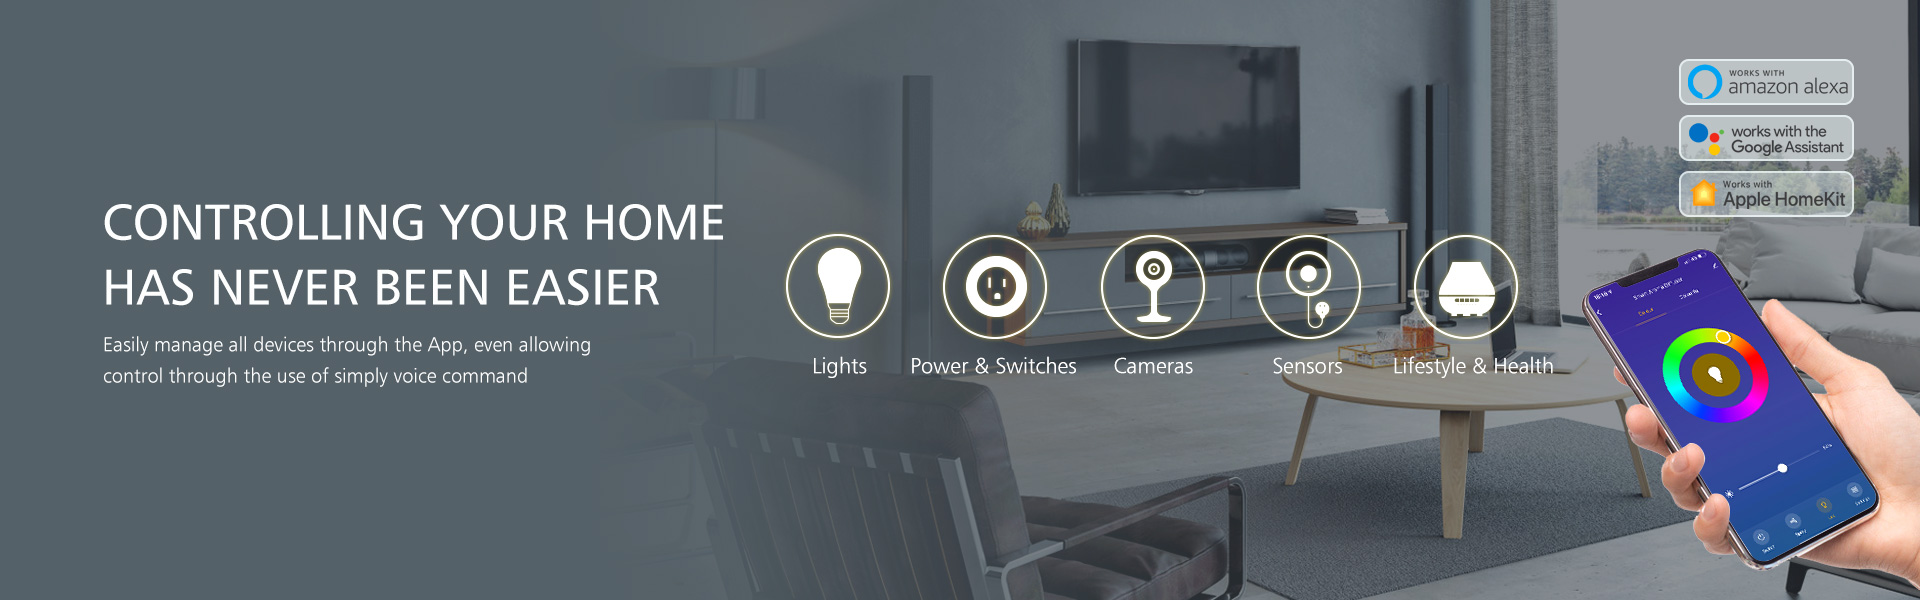 CONTROLLING YOUR HOME HAS NEVER BEEN EASIER